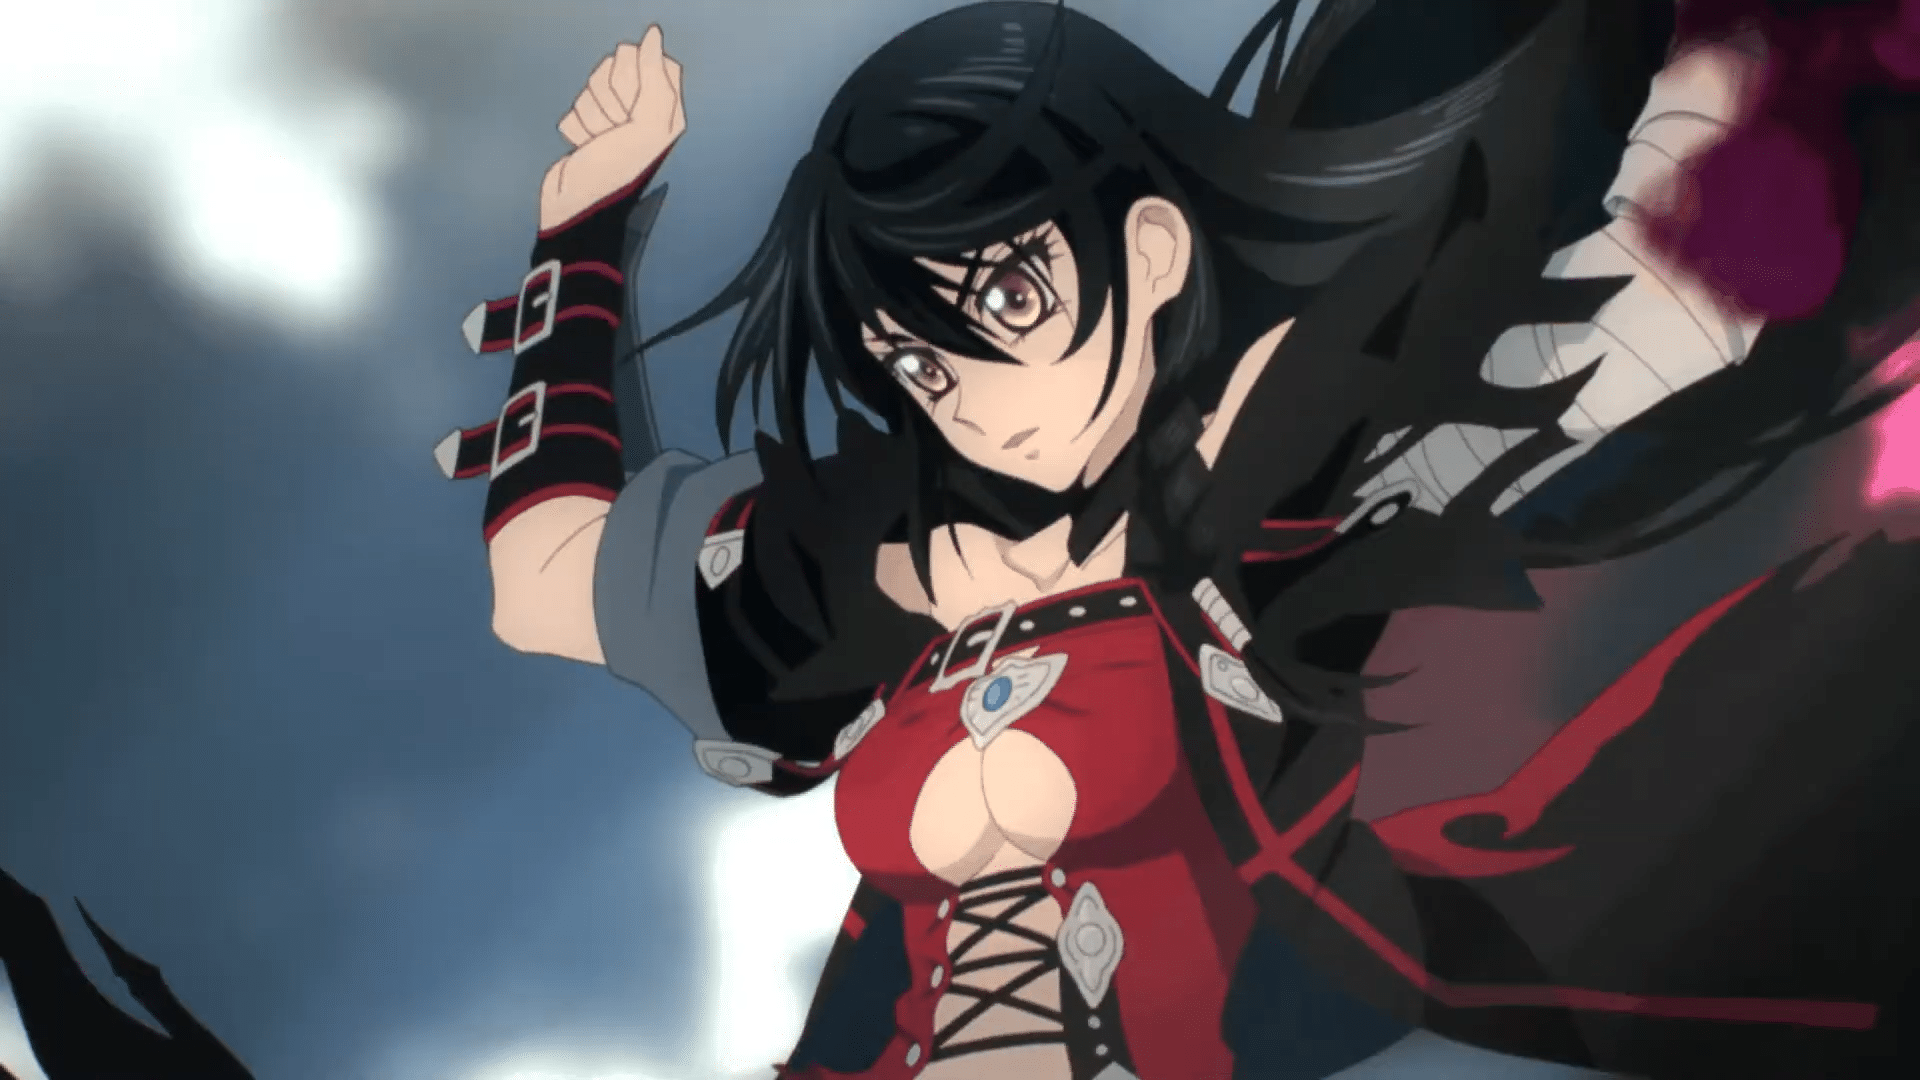 Tales of Berseria Is Currently Unsupported On Steam Deck